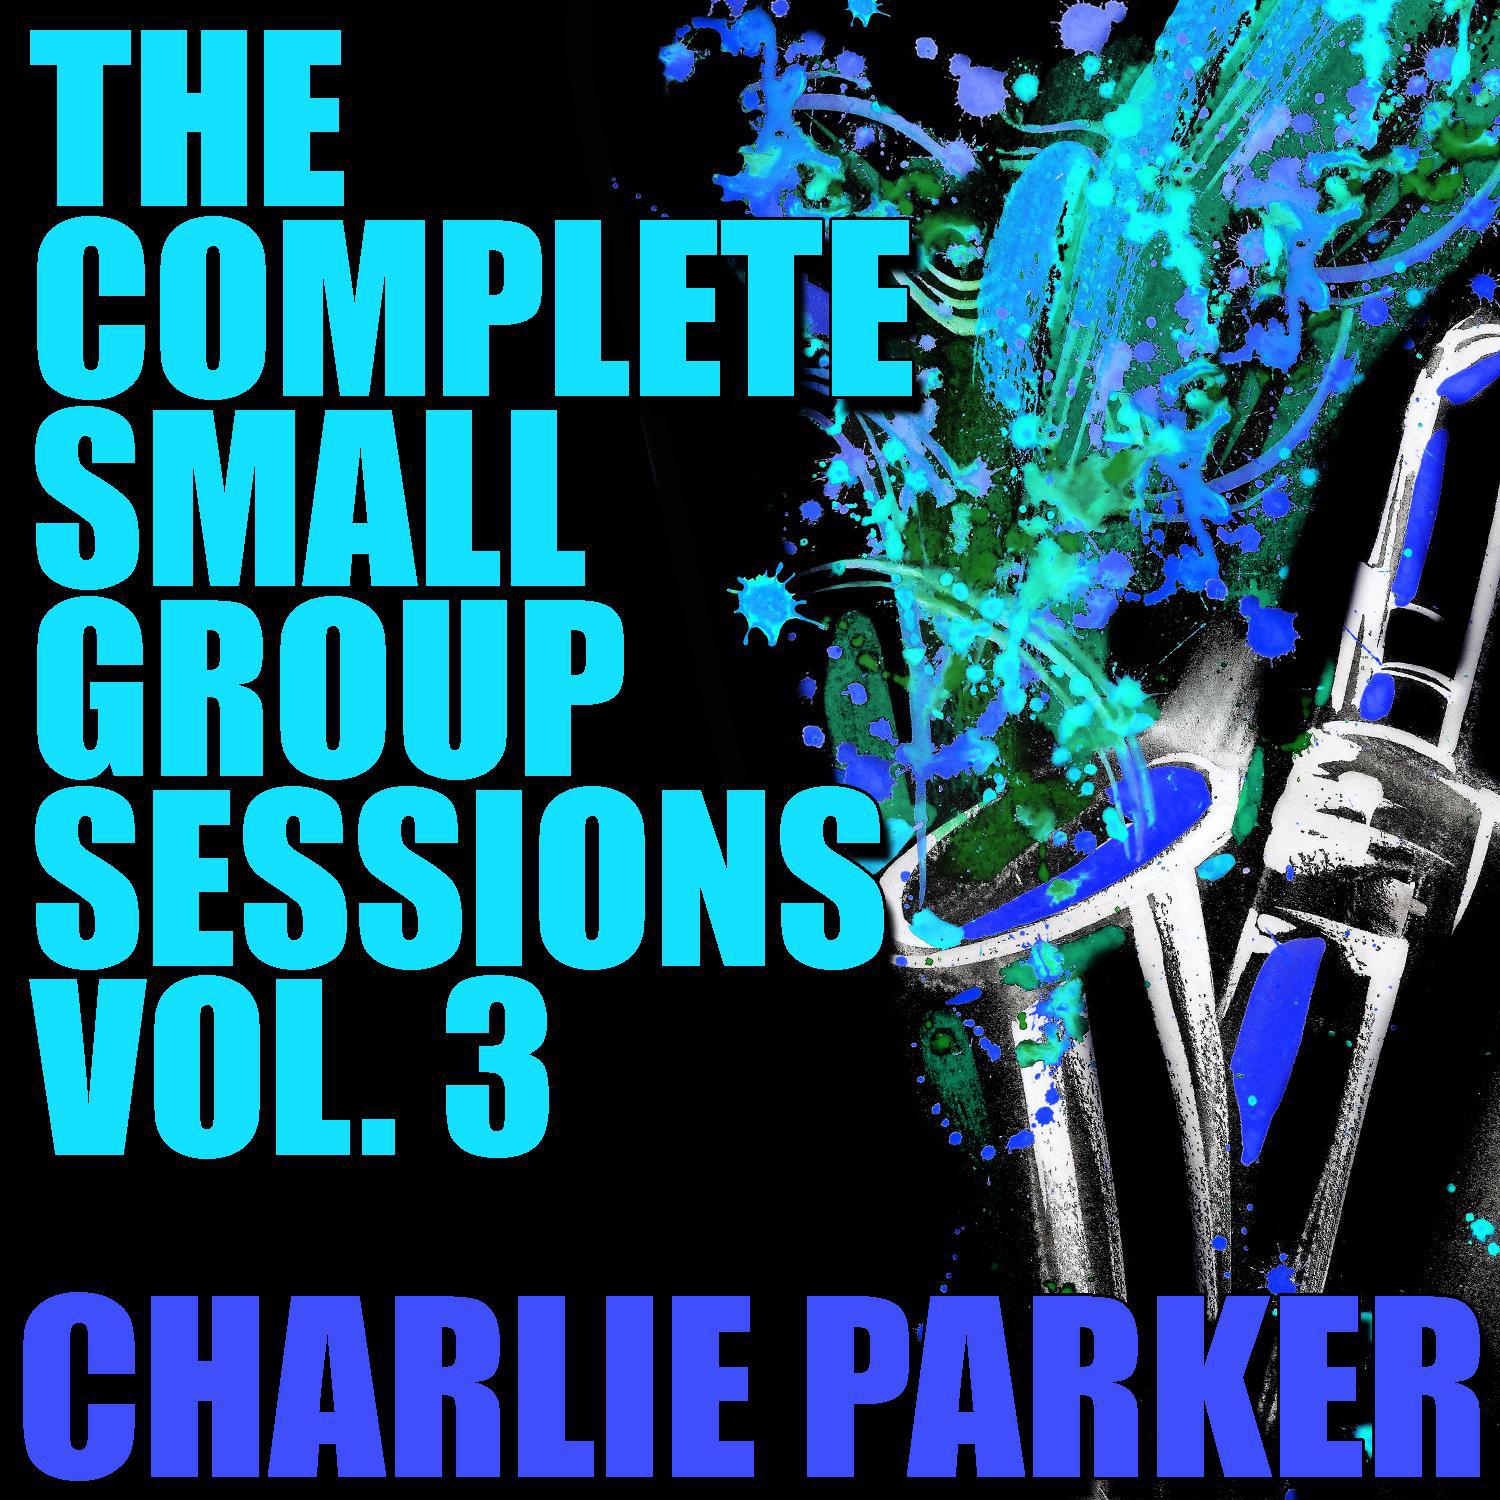 The Complete Small Group Sessions Vol. 3